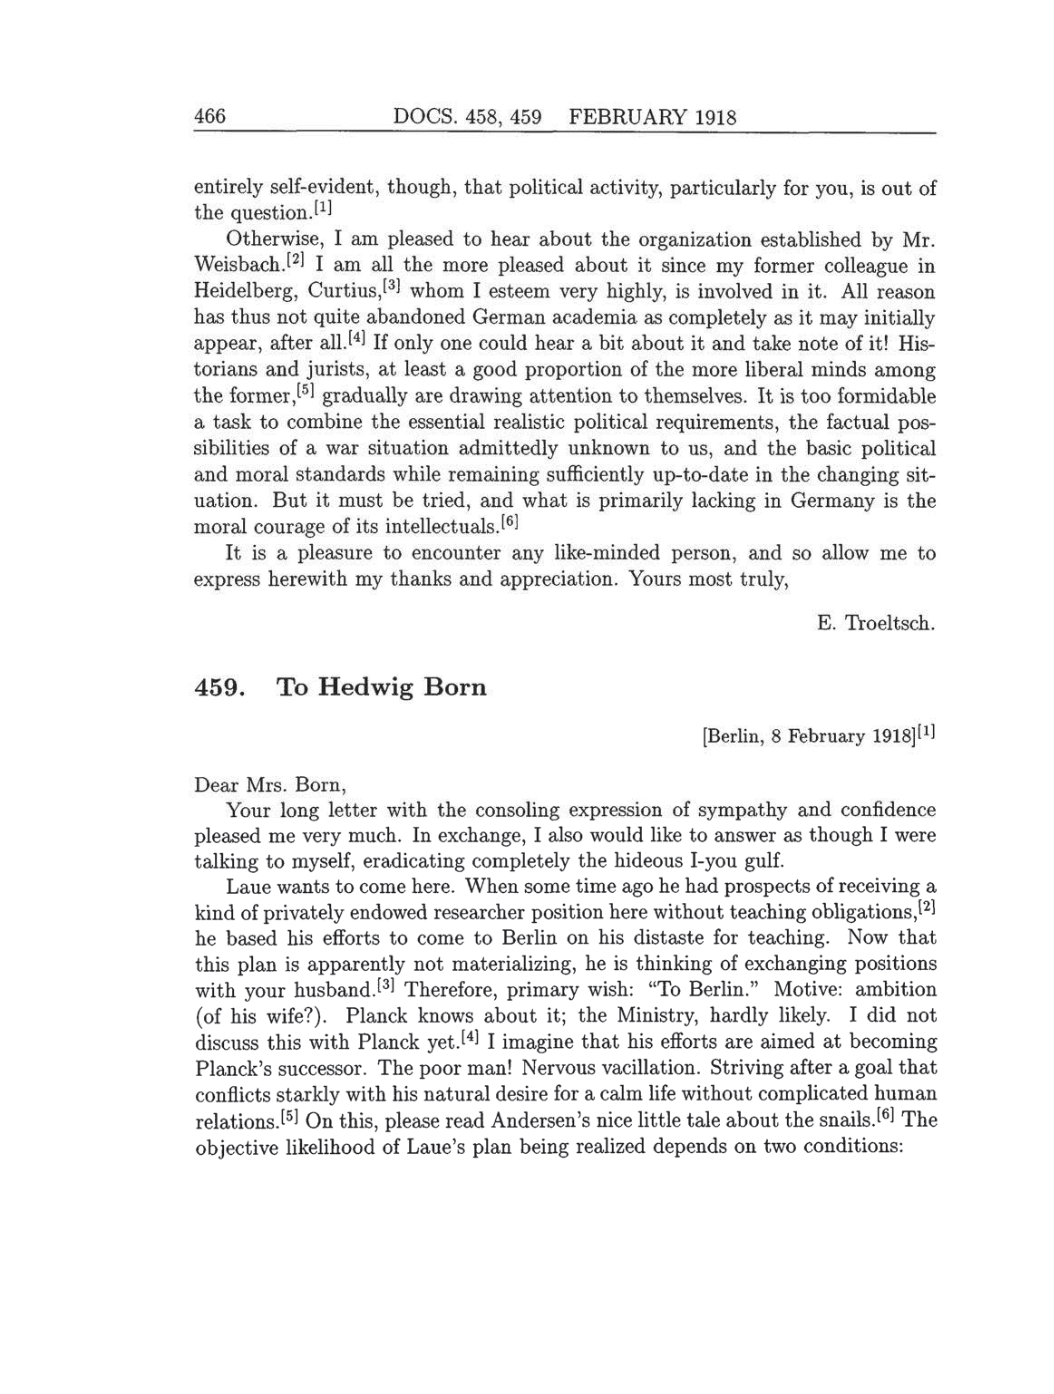 Volume 8: The Berlin Years: Correspondence, 1914-1918 (English translation supplement) page 466